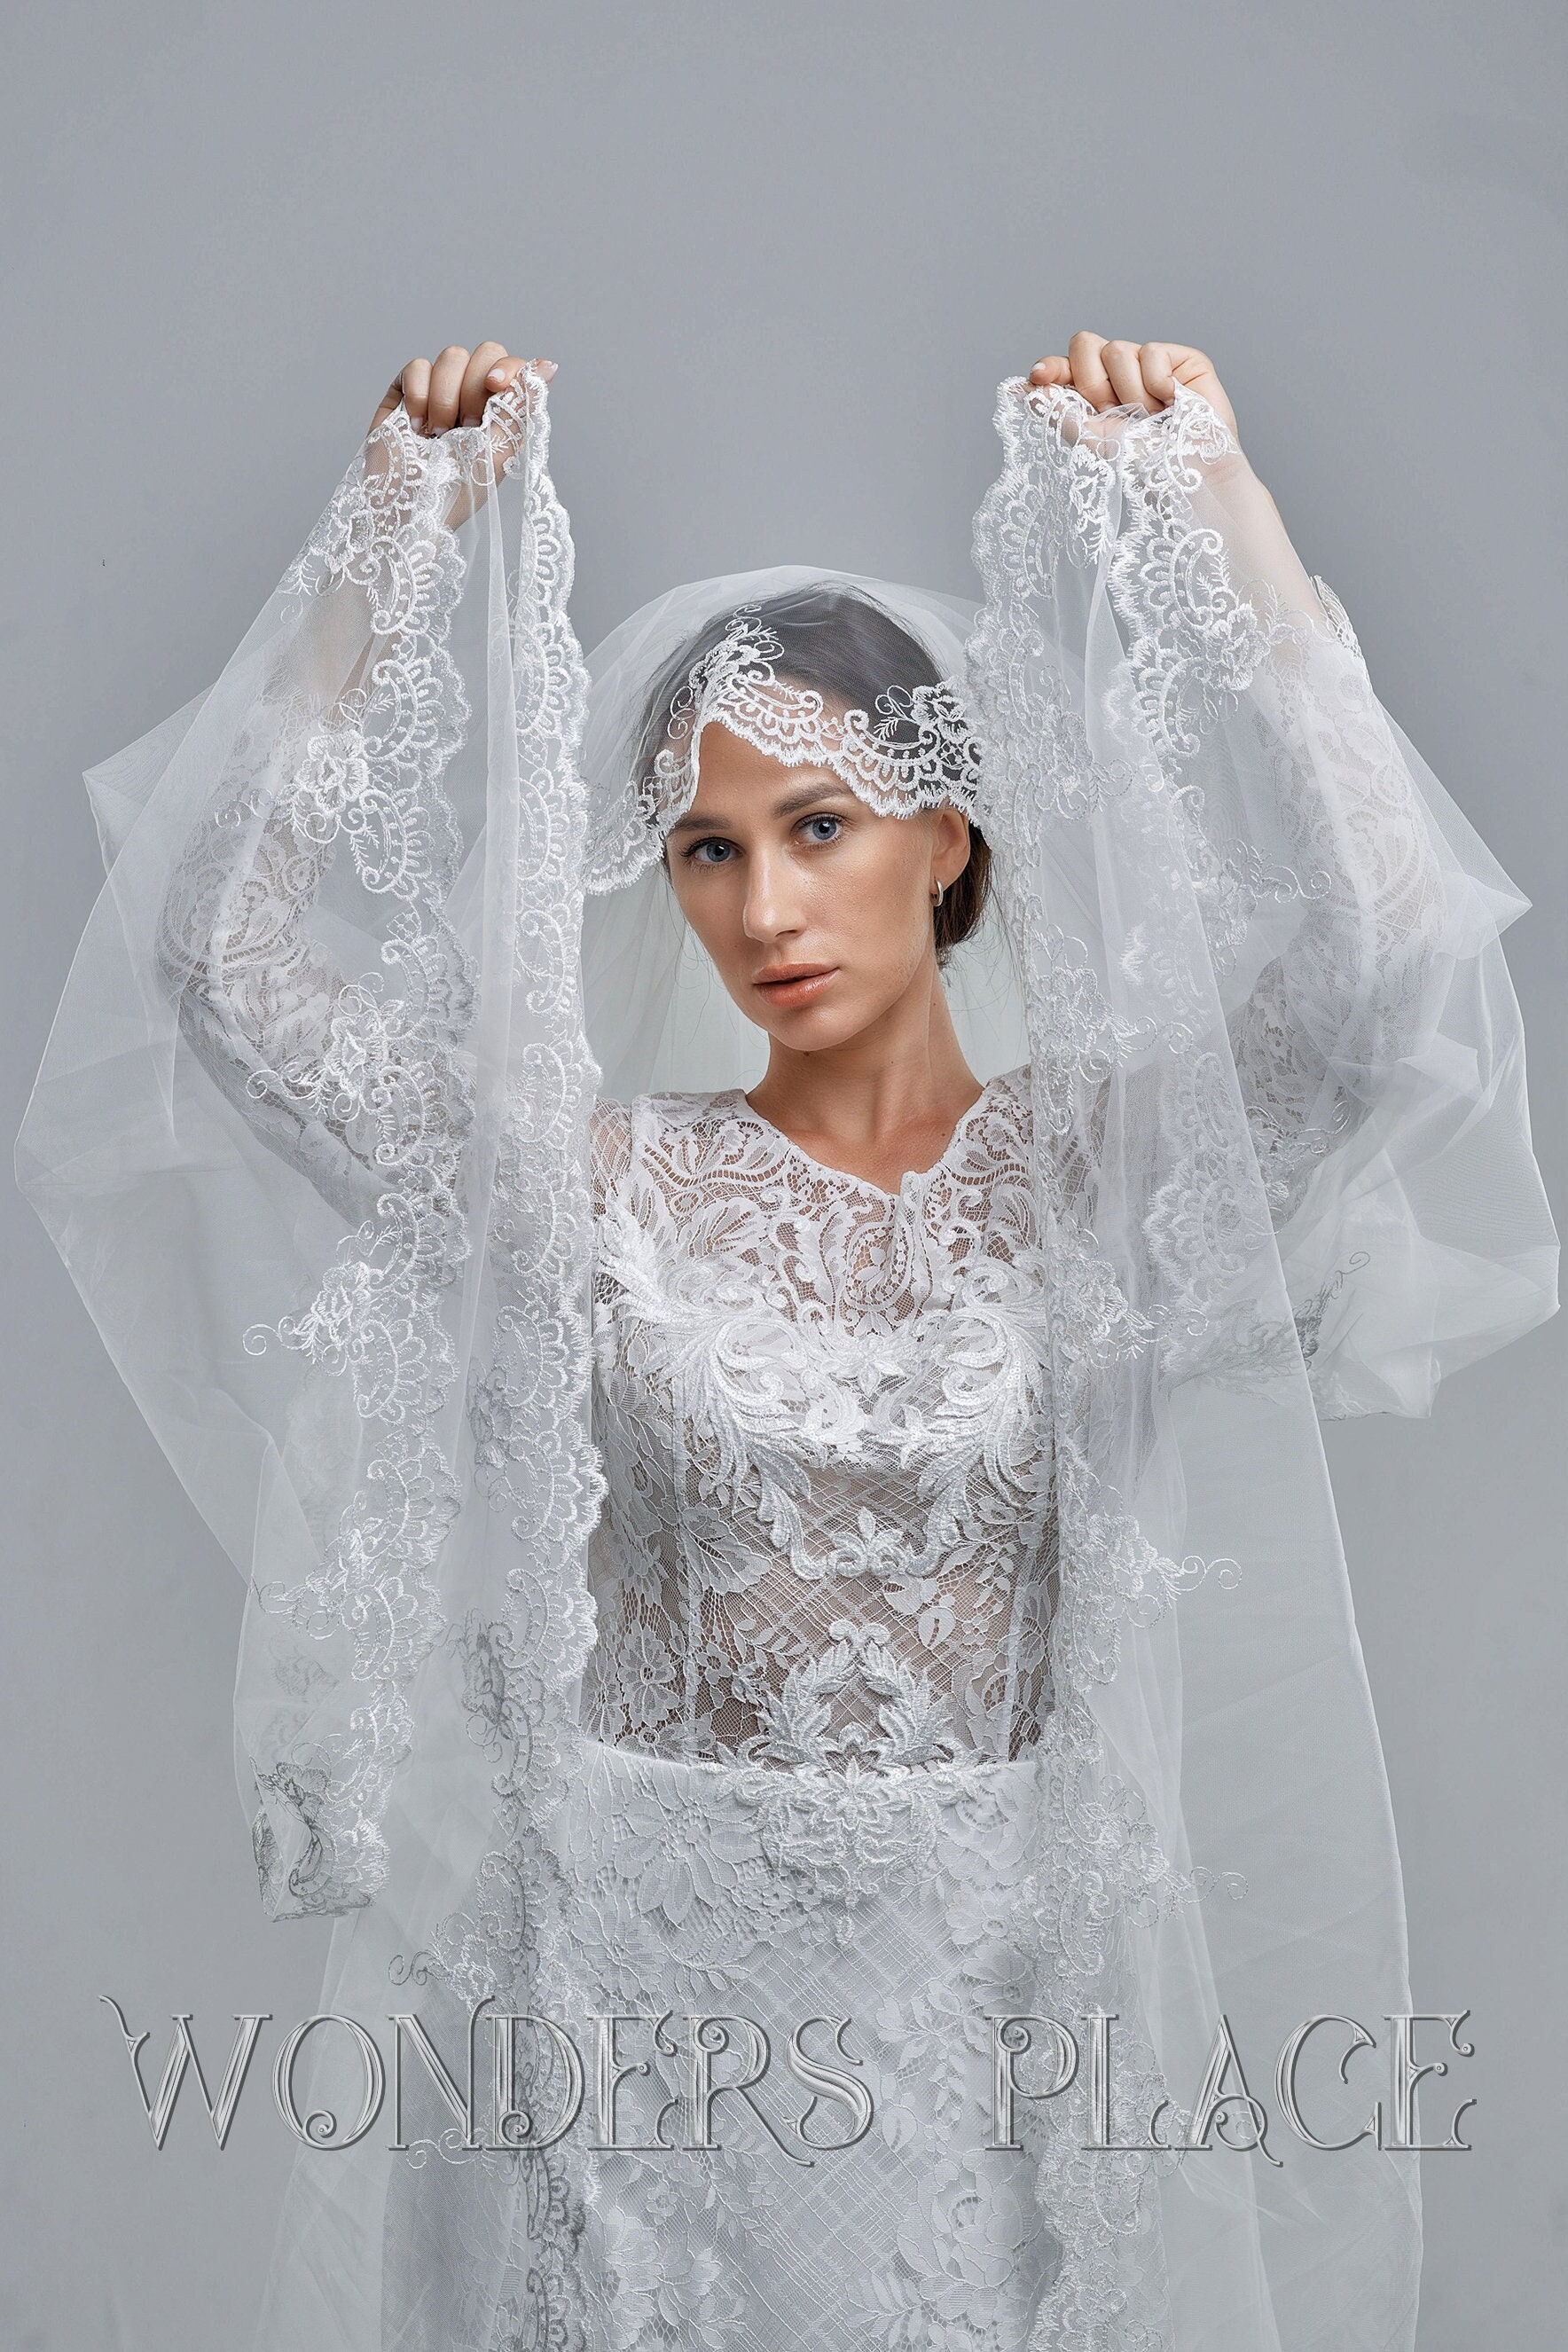 One Blushing Bride Peace - Fingertip Length Wedding Veil with Scalloped French Lace Trim Light Ivory / Fingertip 35-38 inch / Beading